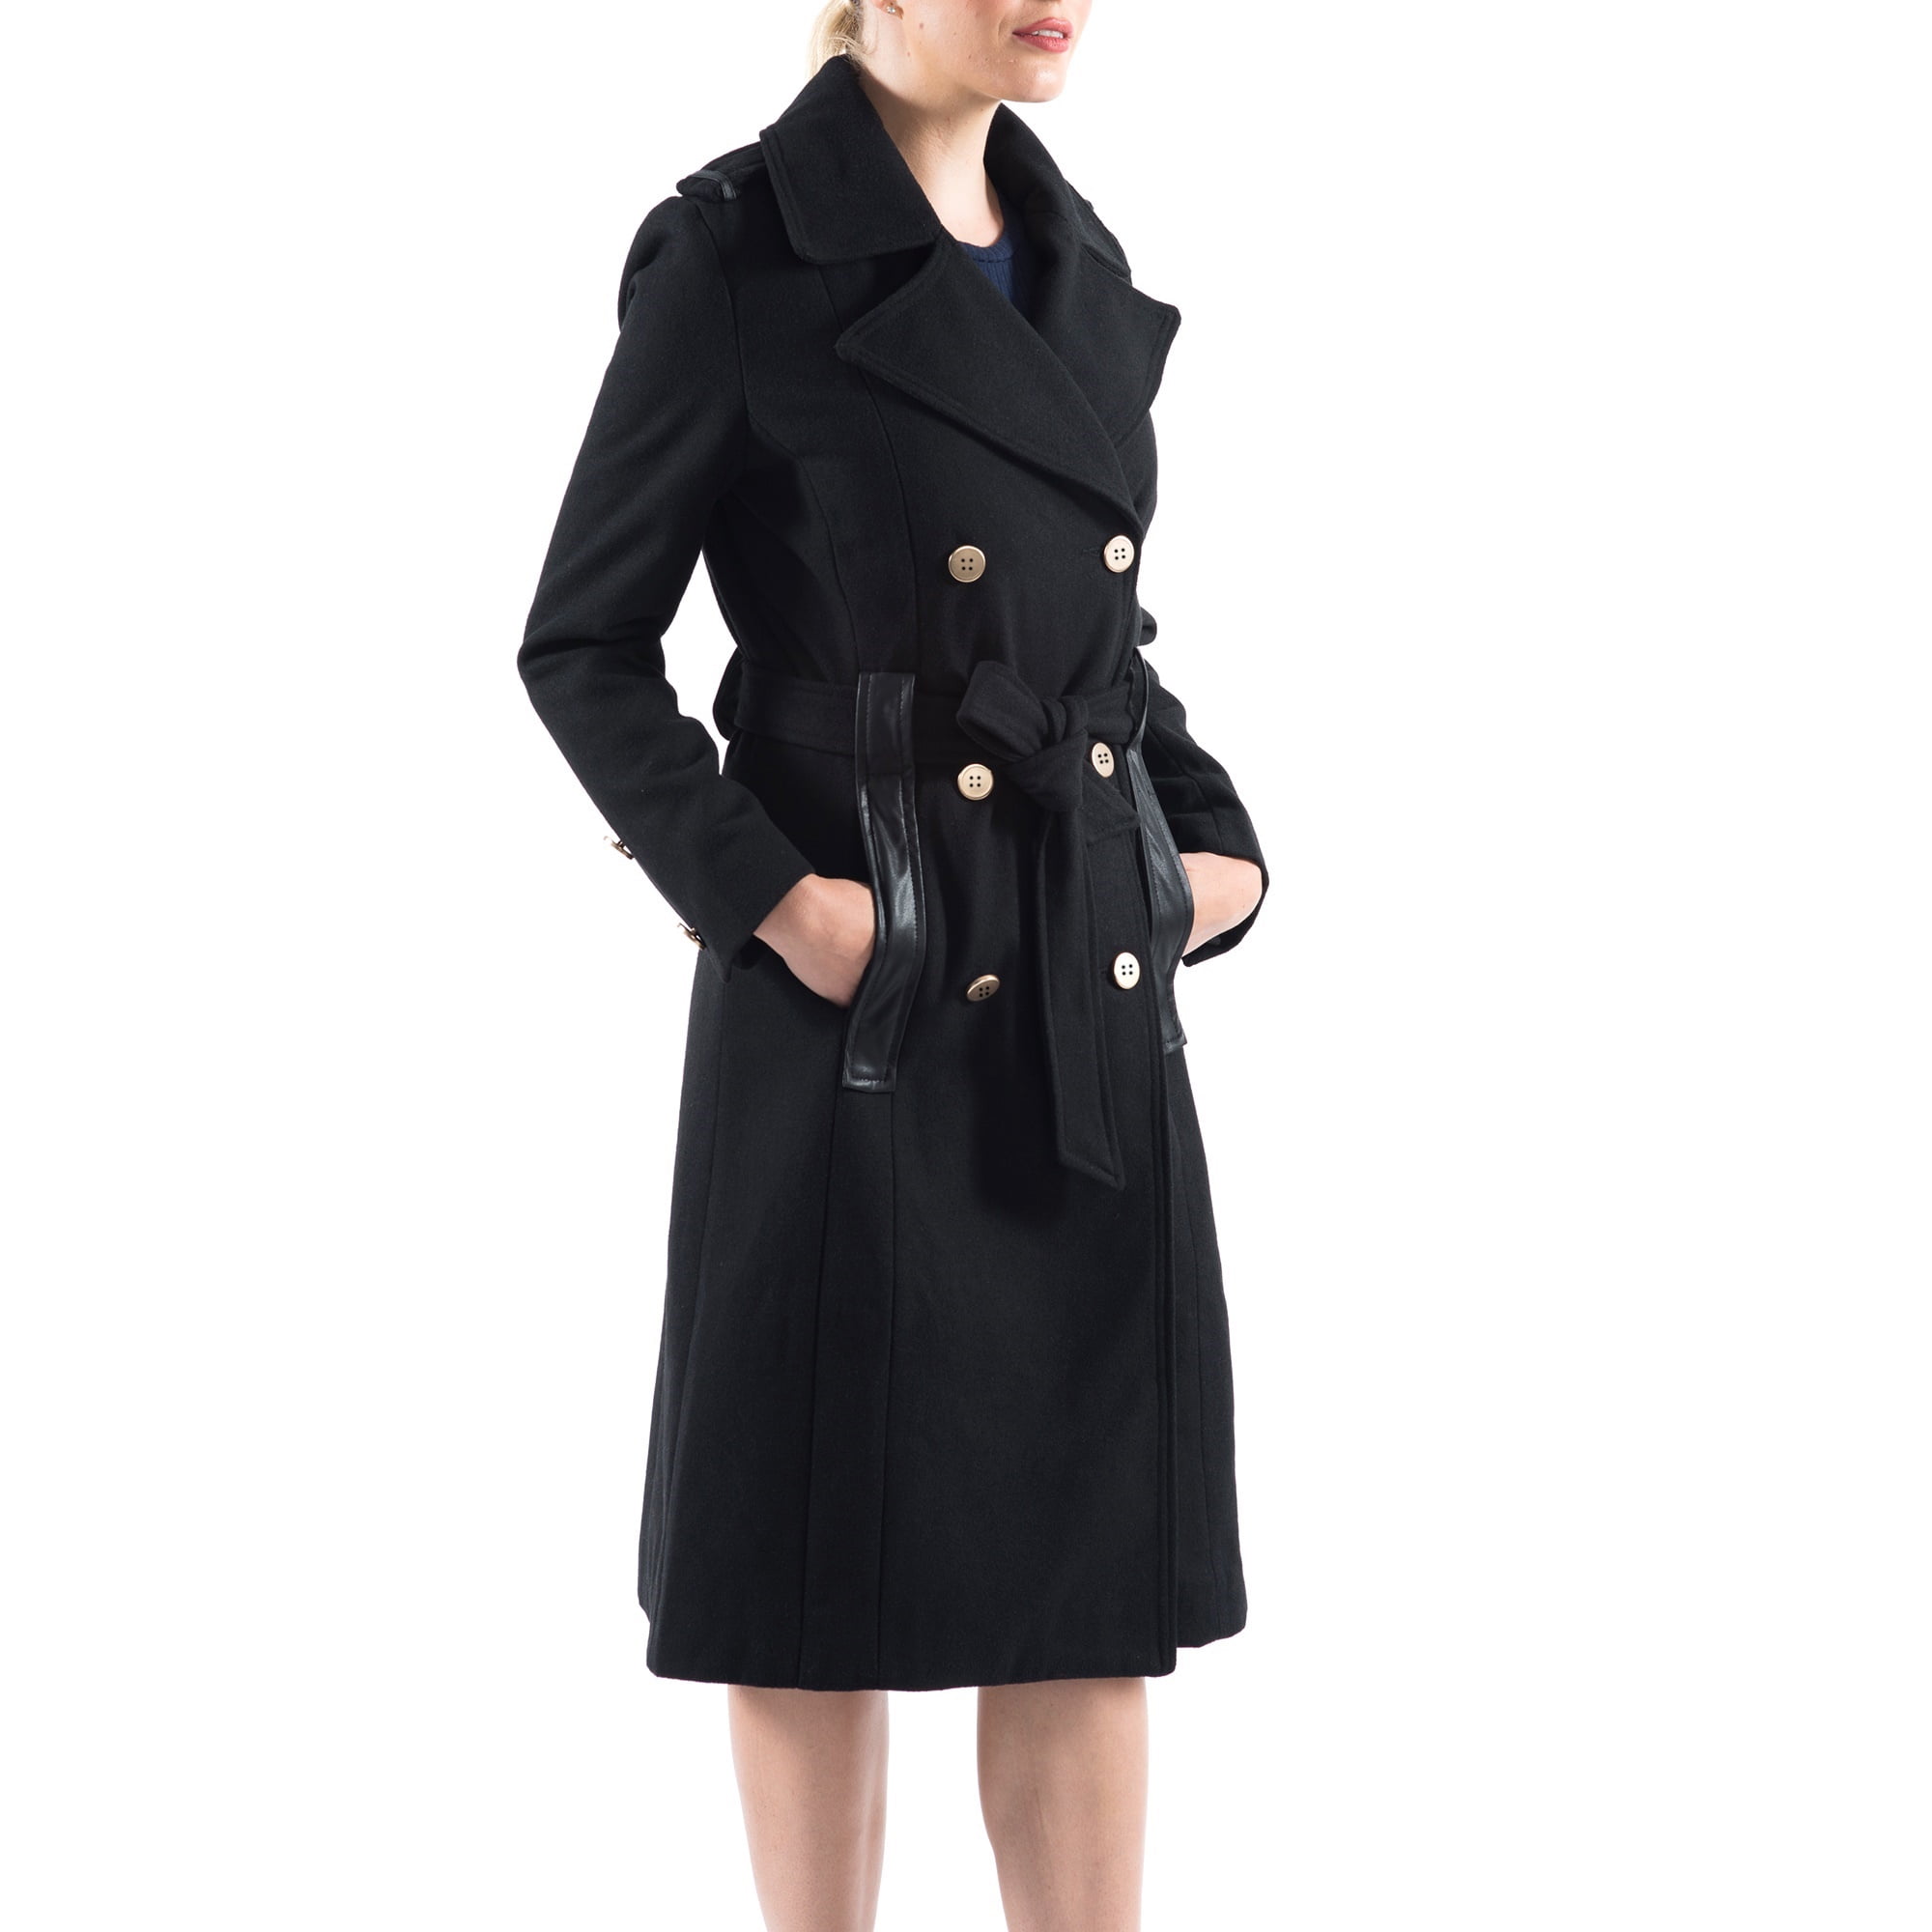 Yeokou Womens Button Faux Leather PU Slim Mid-Long Trench Coat Jacket Outerwear